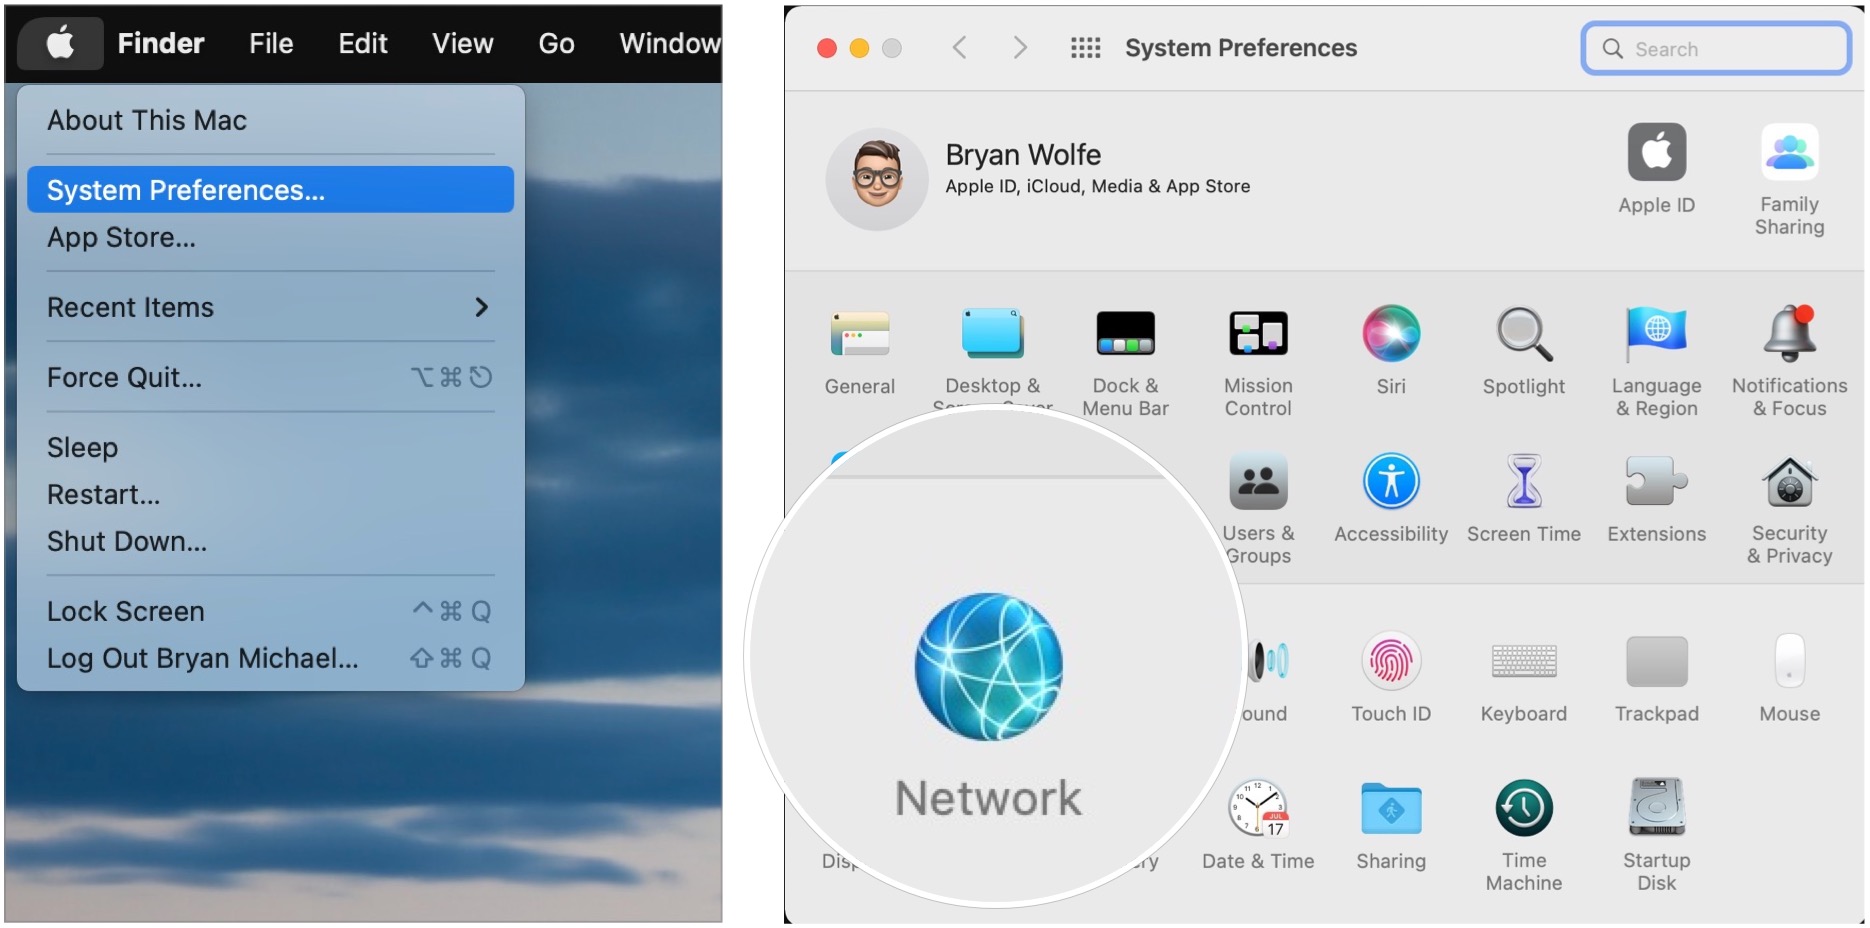 To connect to a VPN on your Mac, click on the Apple icon at the top left, then choose System Preferences from the pull-down menu. Then select Network. 